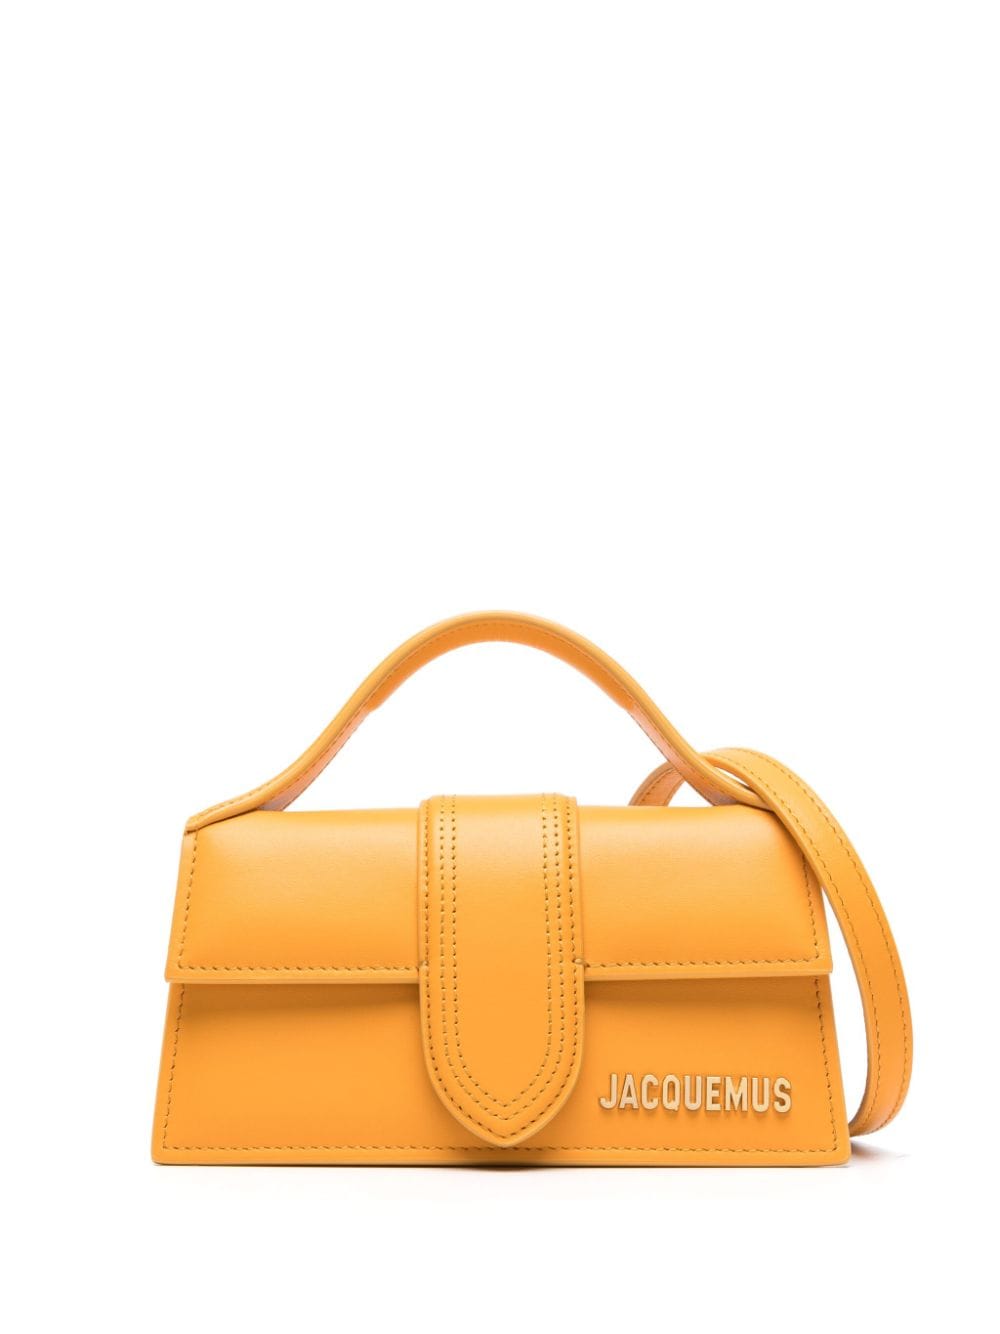 Amber Yellow Leather Foldover Bag with Gold-Tone Hardware